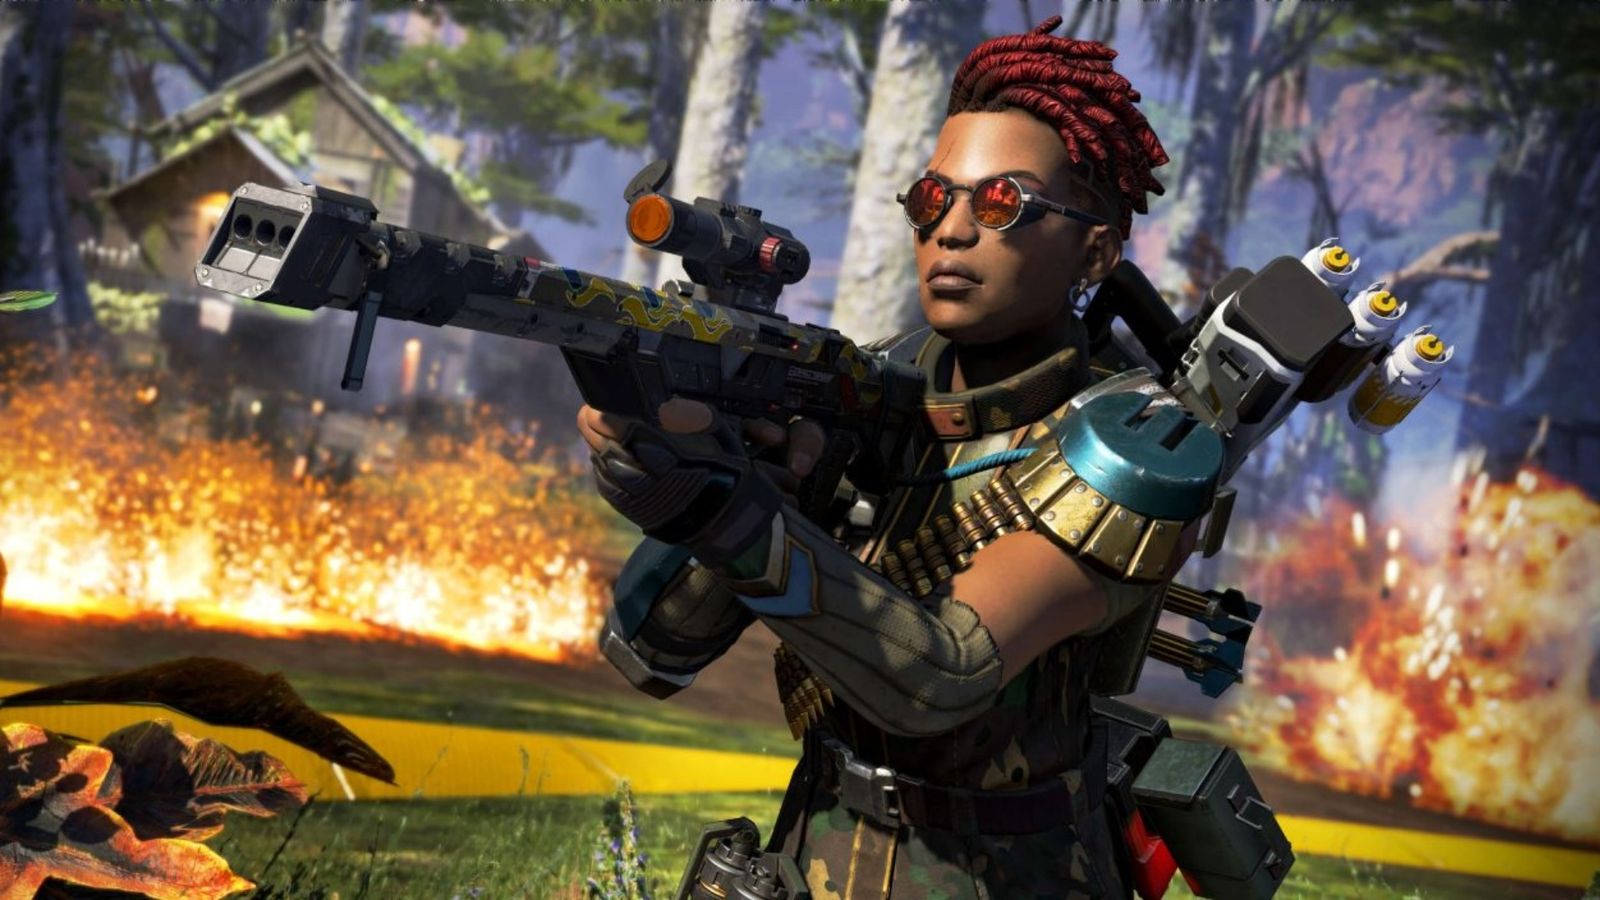 Apex Legends Bangalore holding a Sniper Rifle while wearing a Legendary Skin.